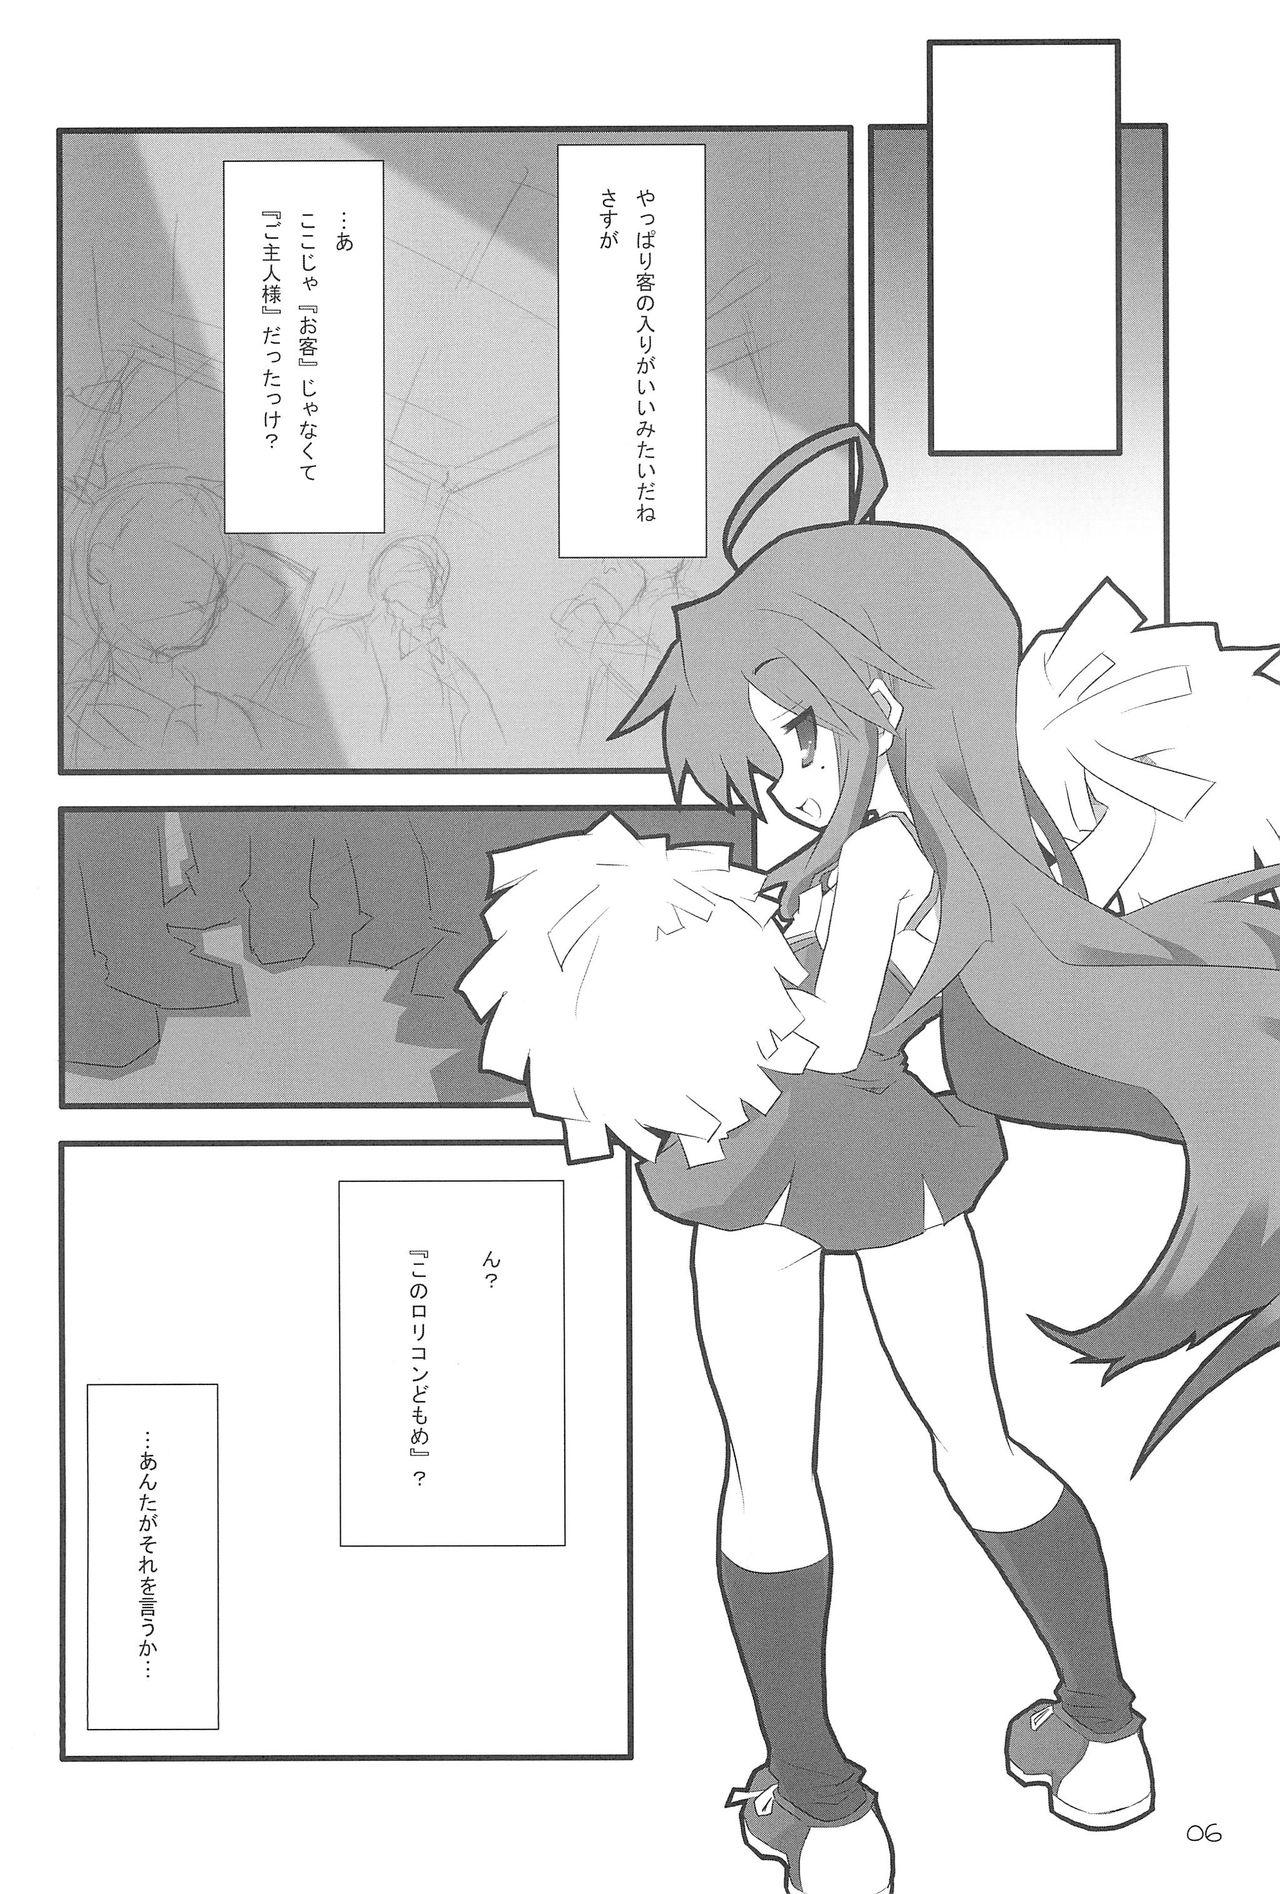 Culo LUCKY STRIKE! - Lucky star Stroking - Page 6